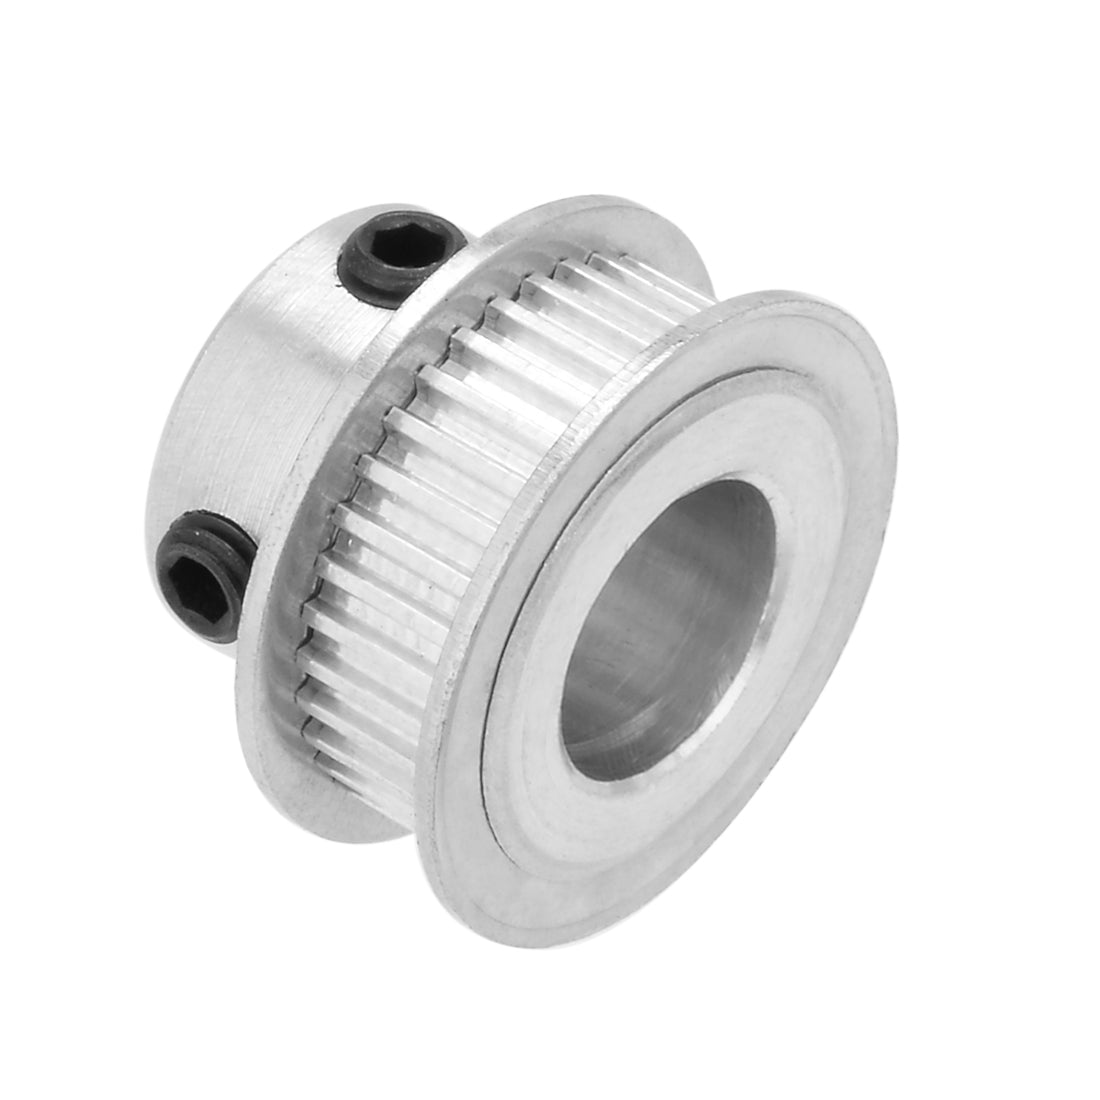 uxcell Uxcell Aluminum  35 Teeth 12mm Bore Timing Belt Idler Pulley Synchronous Wheel 6mm Belt for 3D Printer CNC